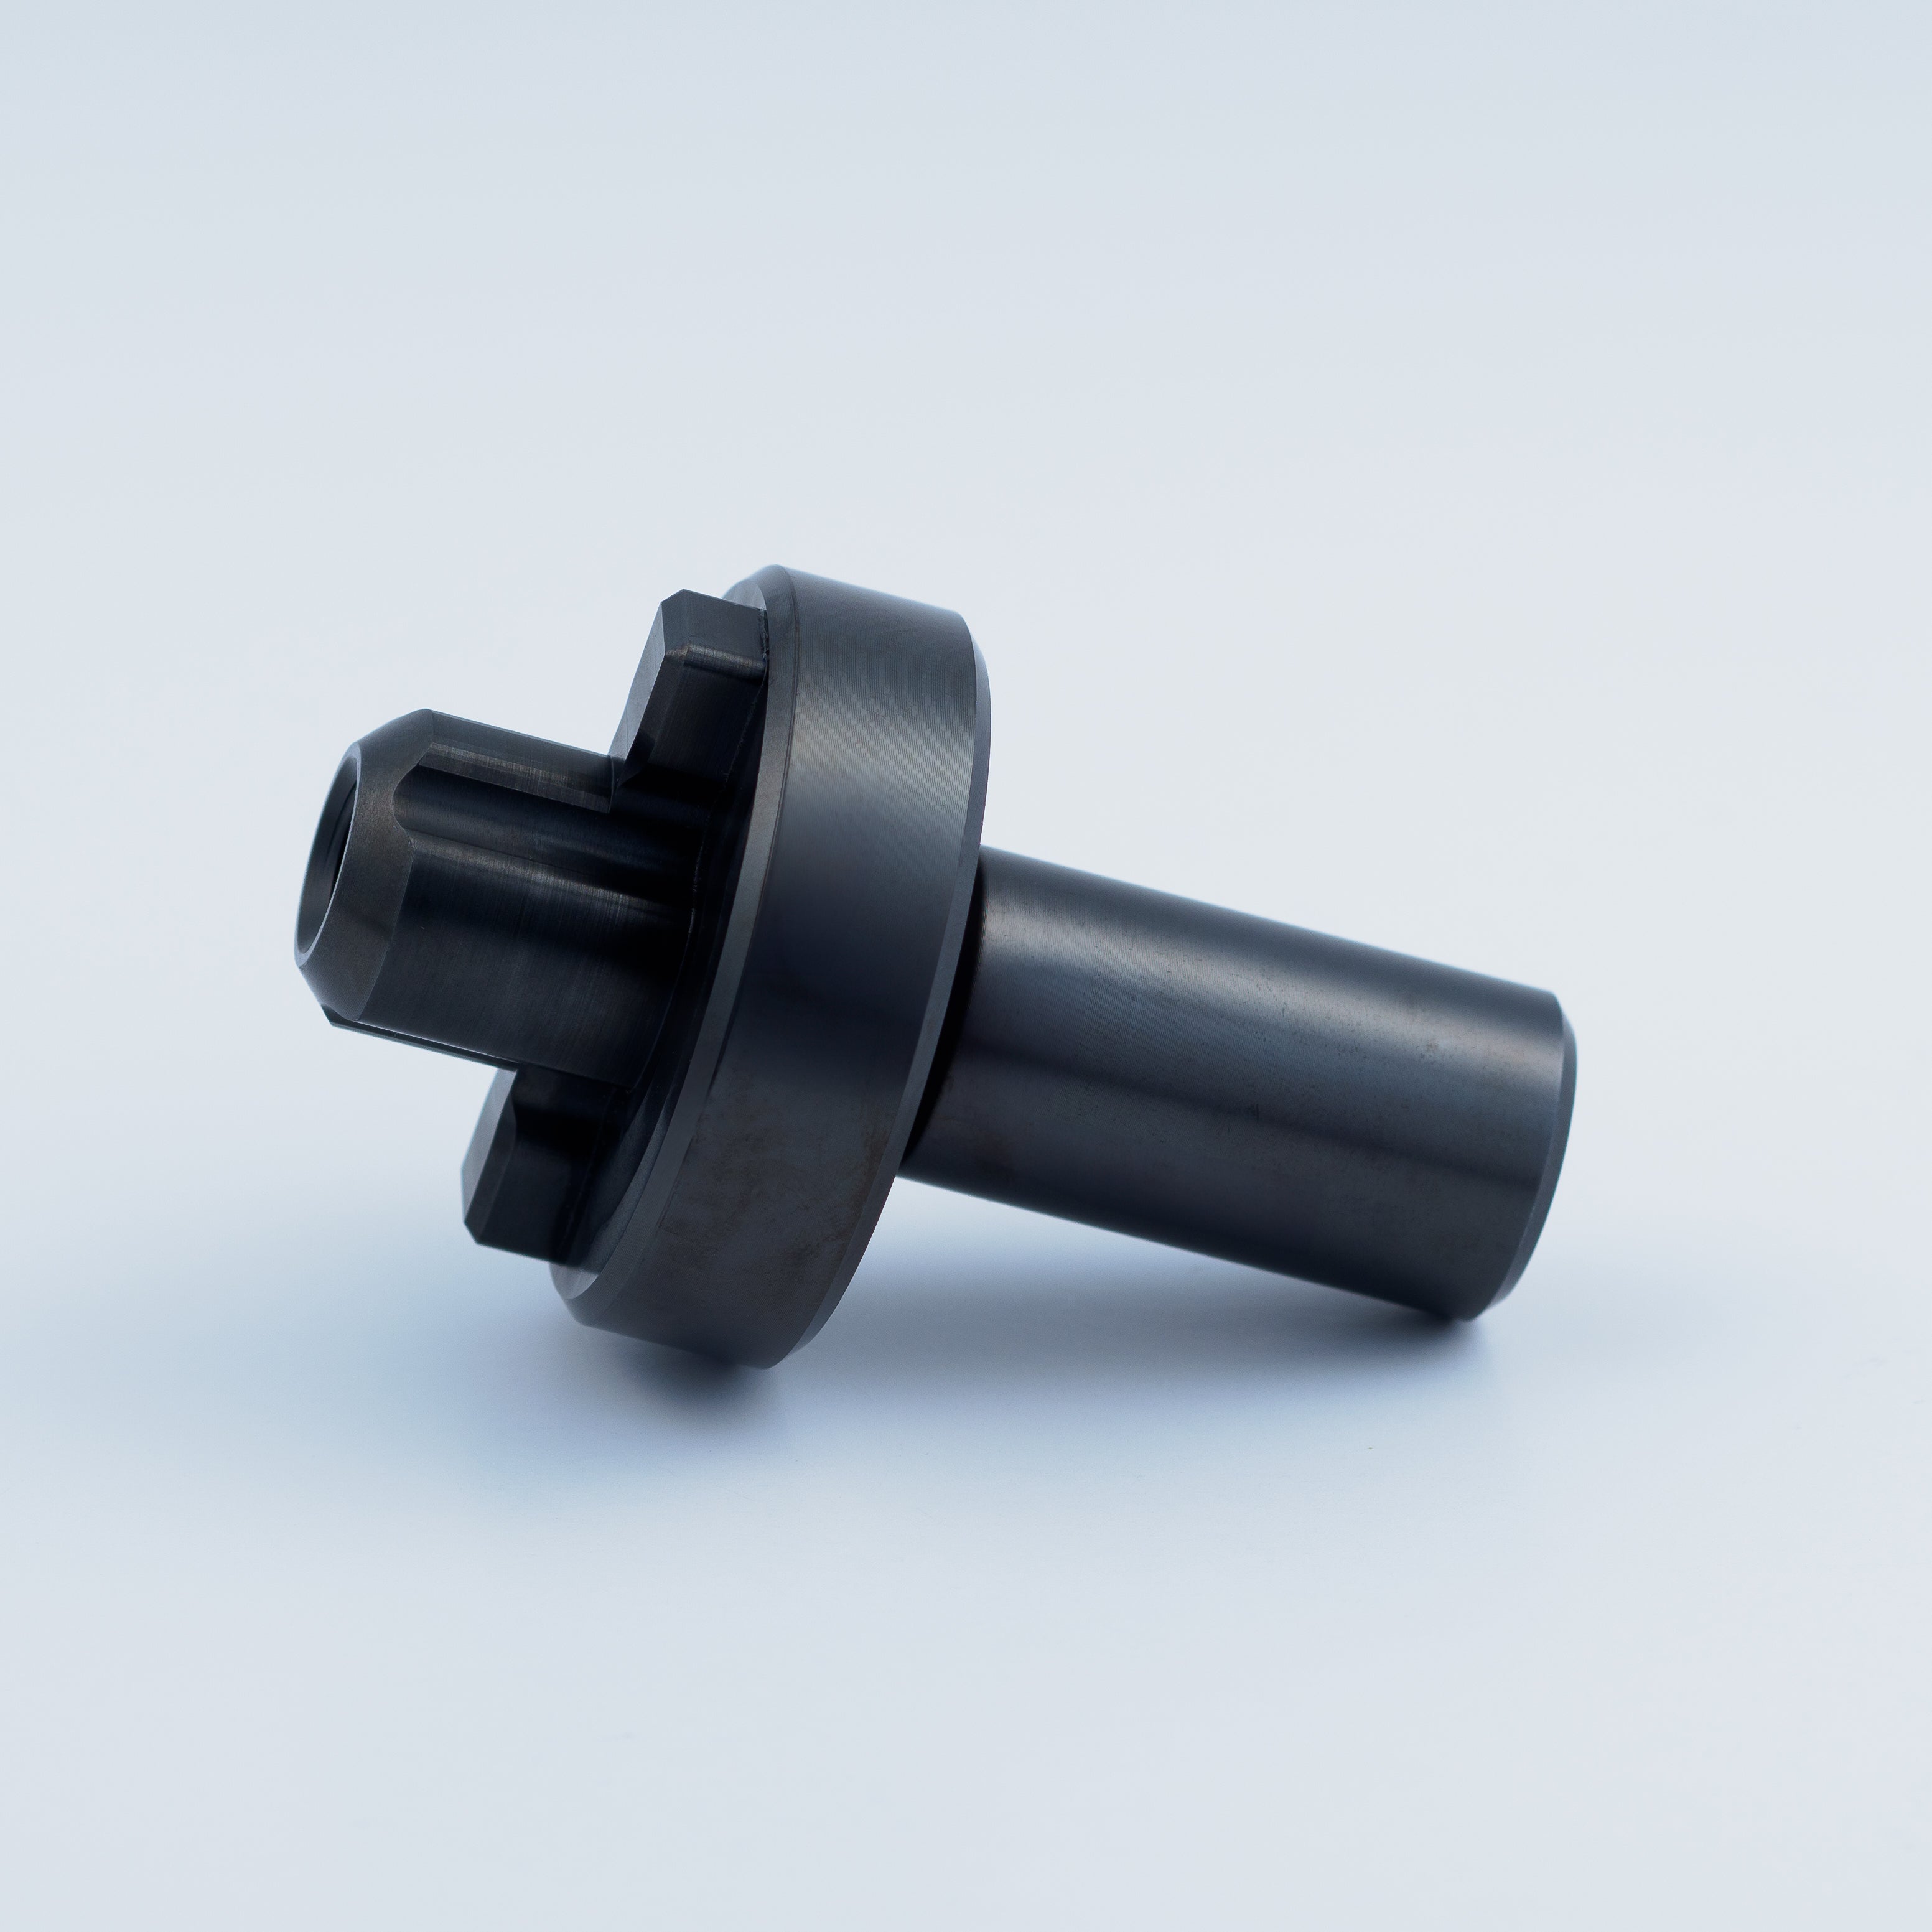 3/4" Arbor Adapter for 2" Face Mills